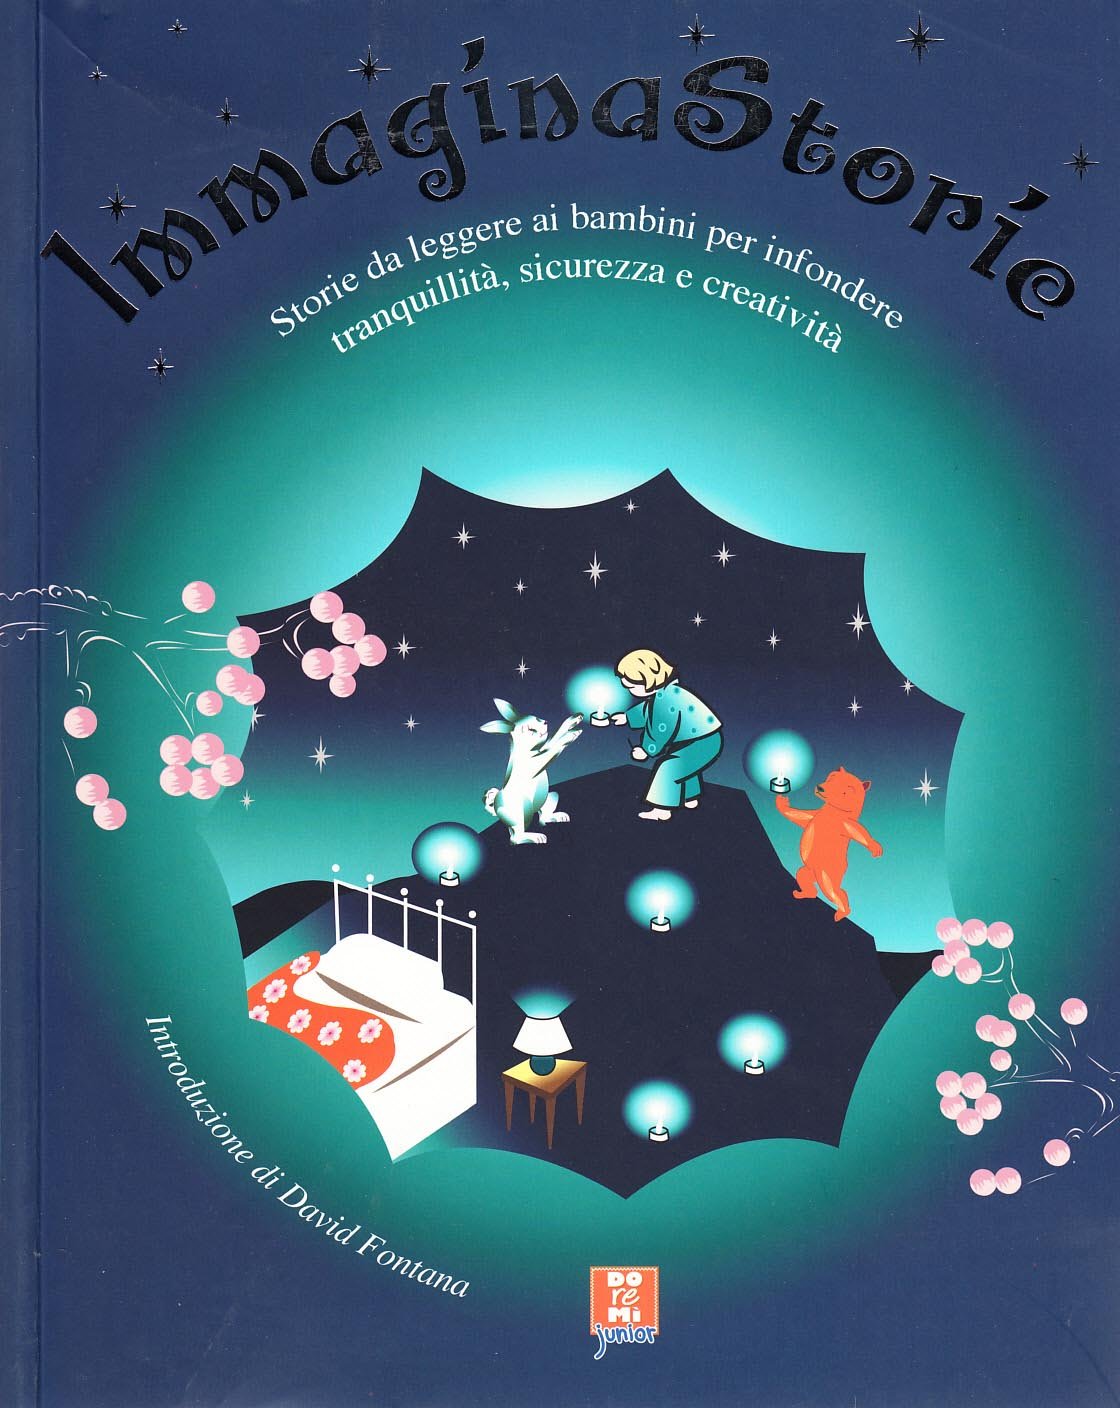 Imagine stories. Stories to read to children to instill tranquility, confidence and creativity